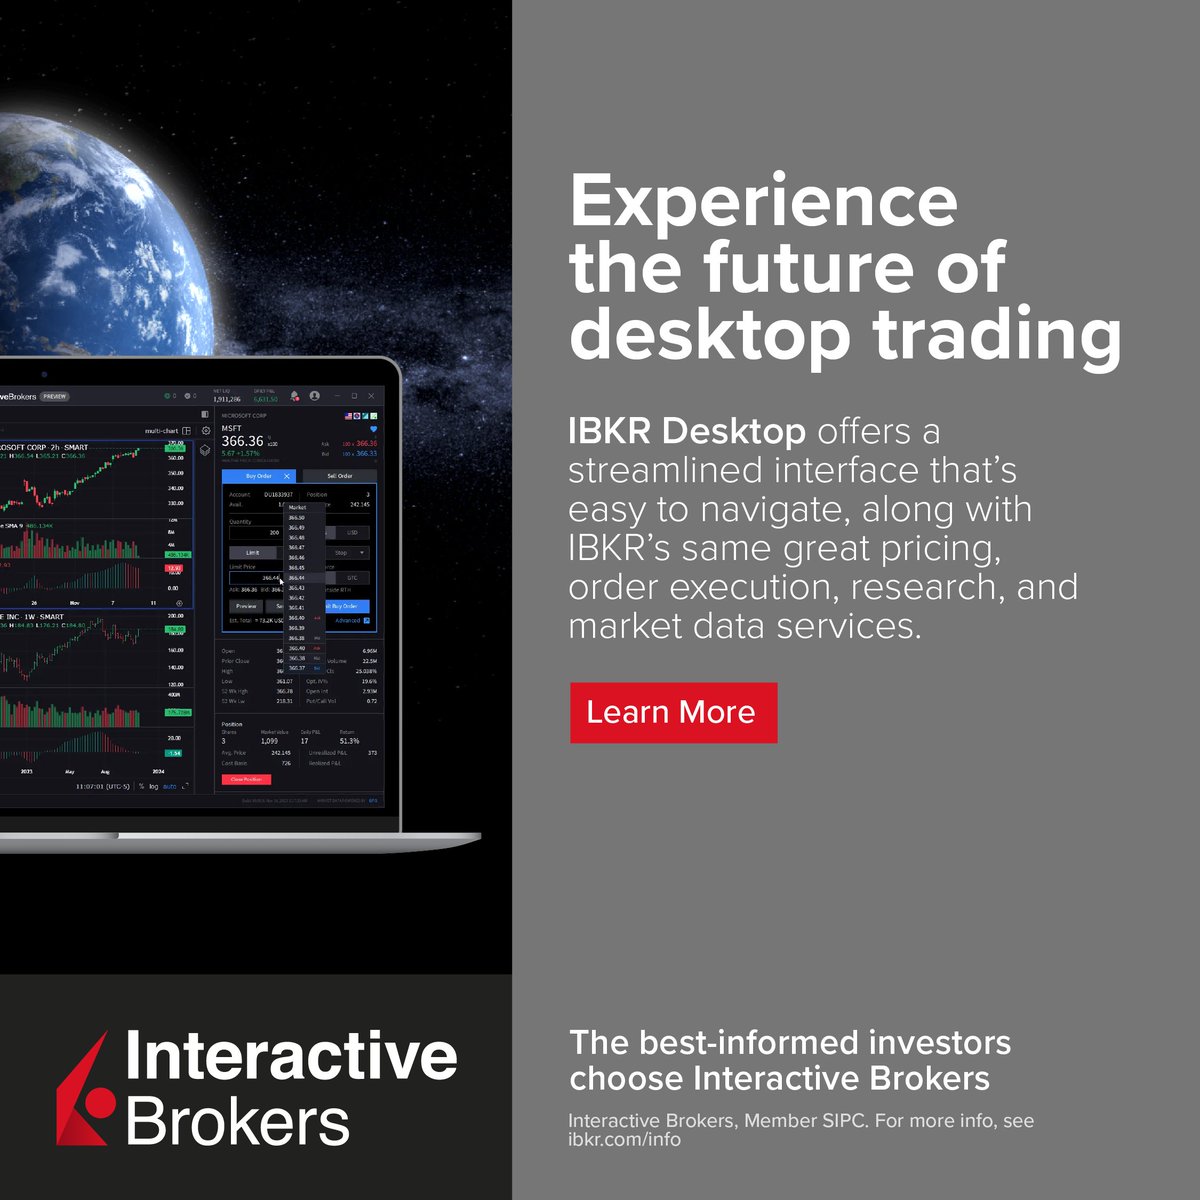 Seeing is believing. We invite you to see for yourself why #IBKRDesktop is on its way to becoming the ultimate trading platform. Download and try it out now: spr.ly/desktopt #IBKR #TradingPlatforms